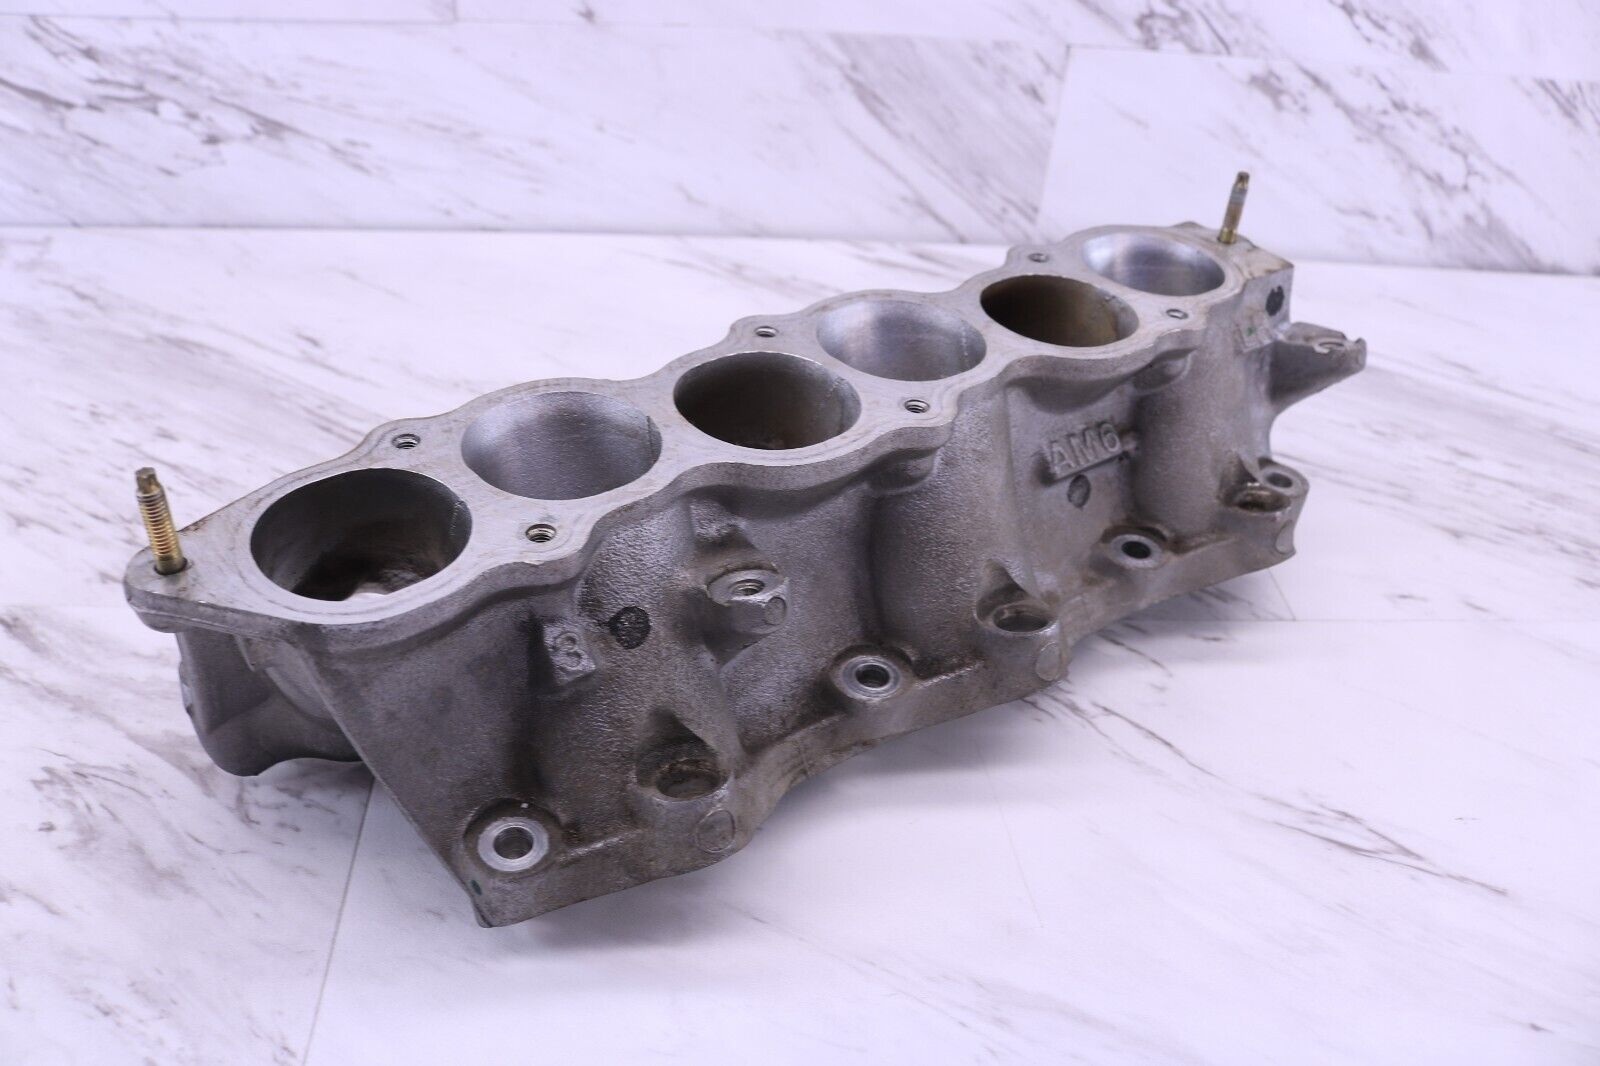 03-06 350Z 03-07 G35 COUPE VQ35DE LOWER INTAKE MANIFOLD INTAKE RUNNER COLLECTOR